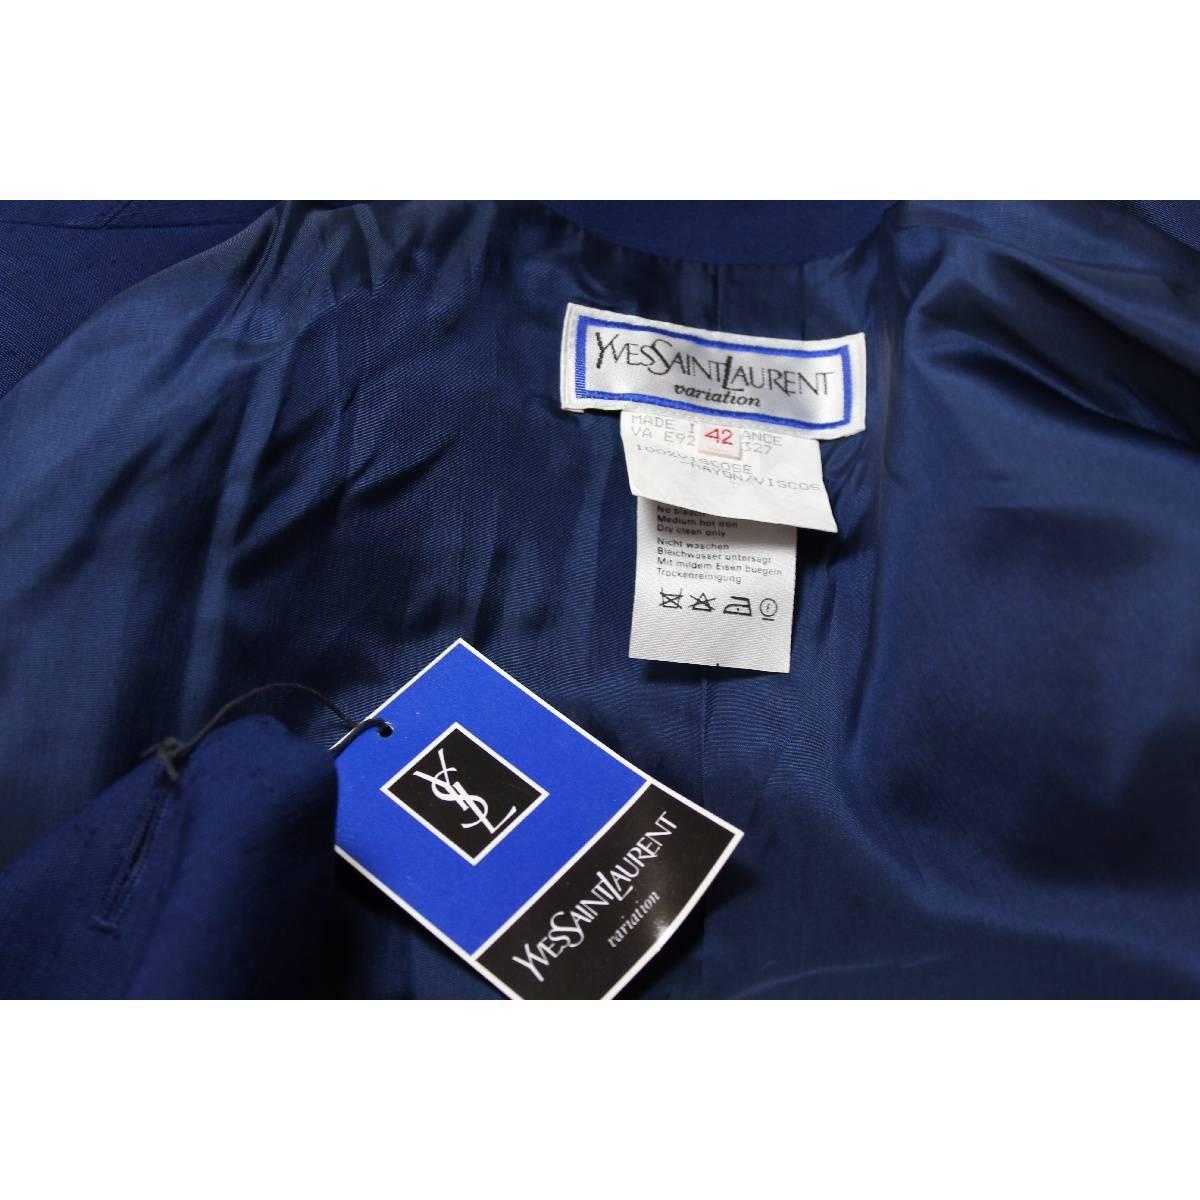 Women's NWT Yves Saint Laurent viscose blue jacket size 44 it made france 1990s For Sale